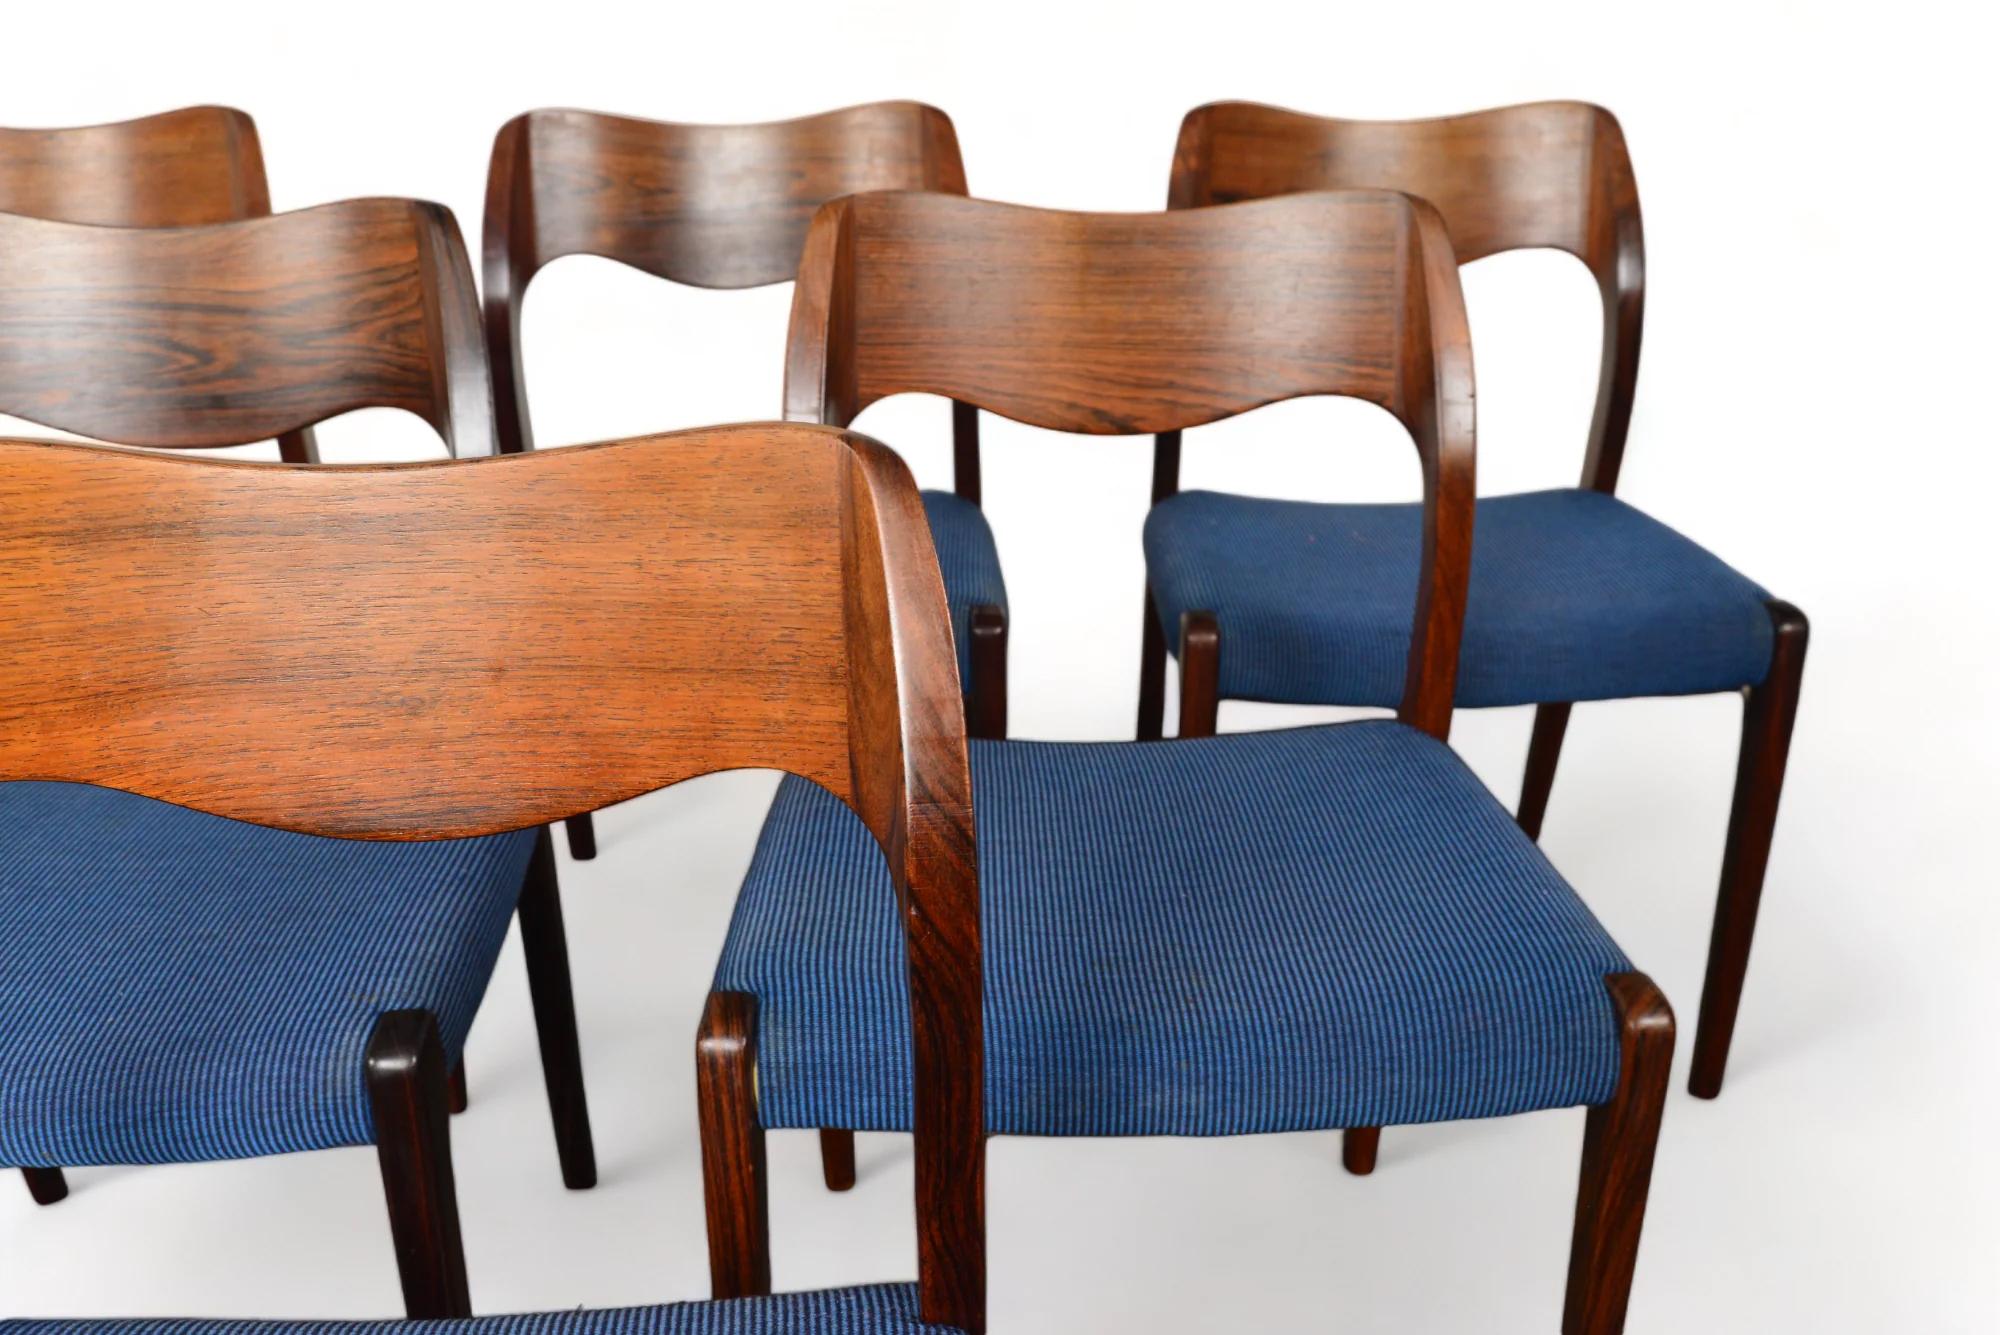 Mid-Century Modern Set Of Six J.l. Møller Model 71 Dining Chairs In Brazilian Rosewood #2 For Sale